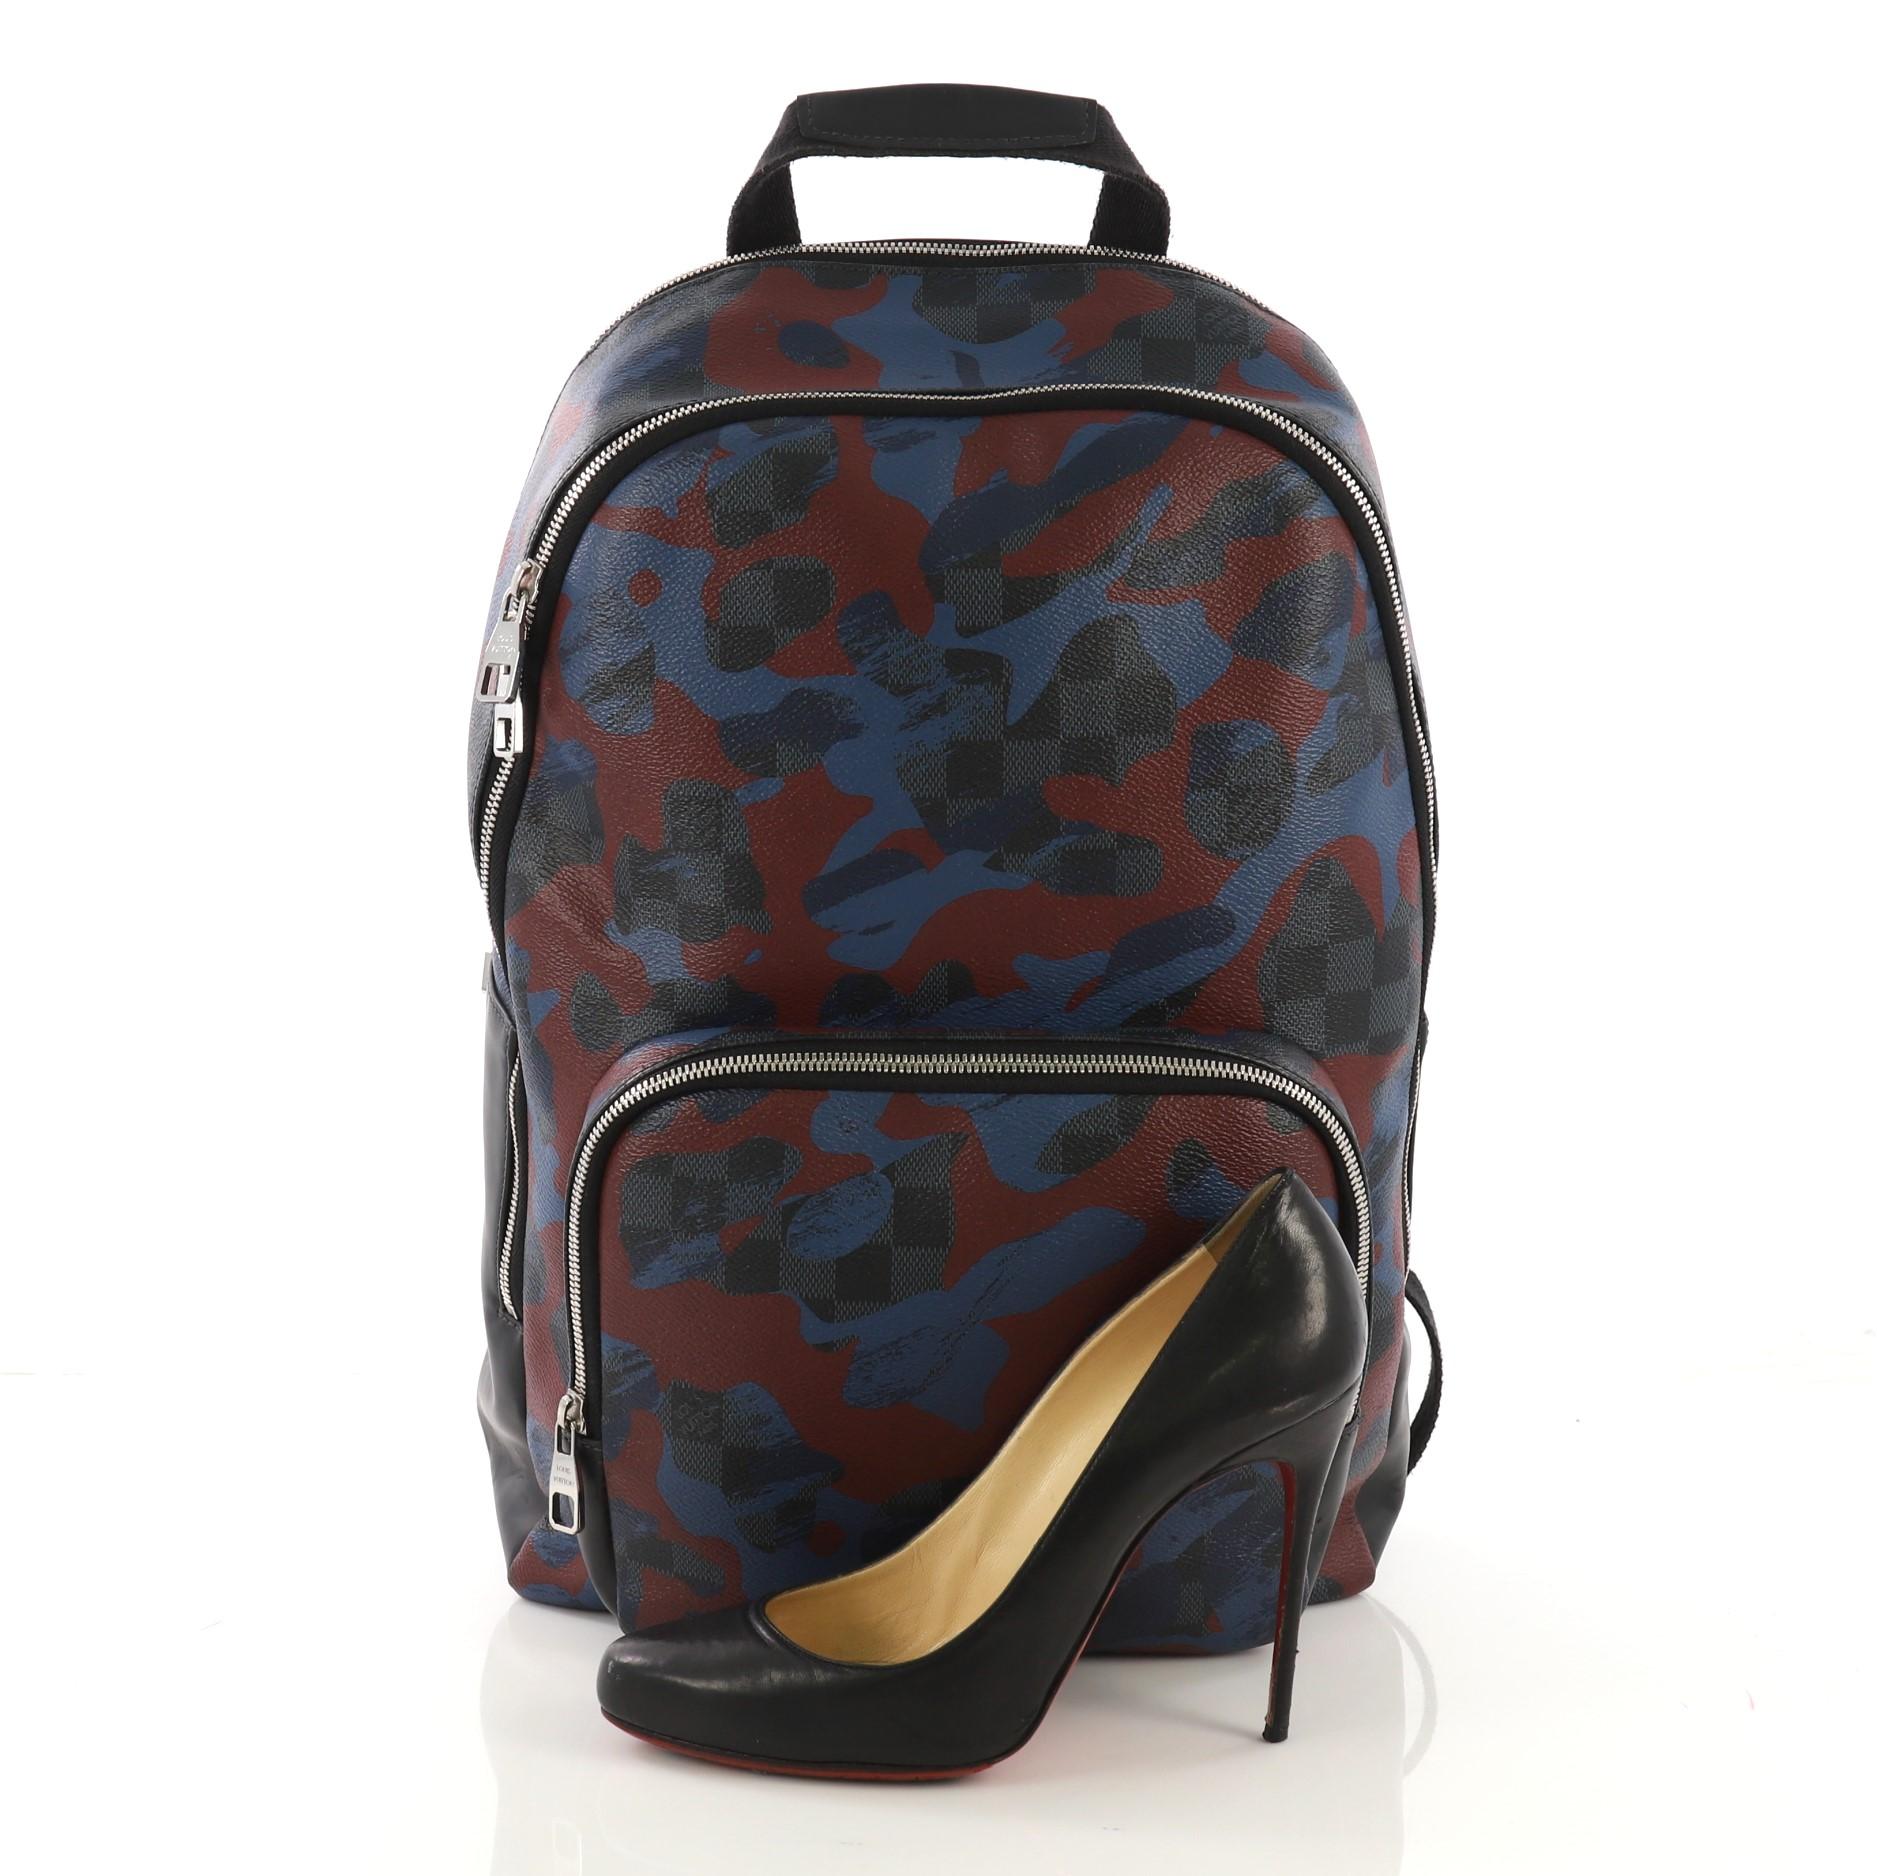 This Louis Vuitton Andy Backpack Limited Edition Camouflage Damier Cobalt, crafted in blue camouflage damier cobalt coated canvas, features a canvas top handle, padded backpack straps, exterior front zip pocket, exterior back padded laptop